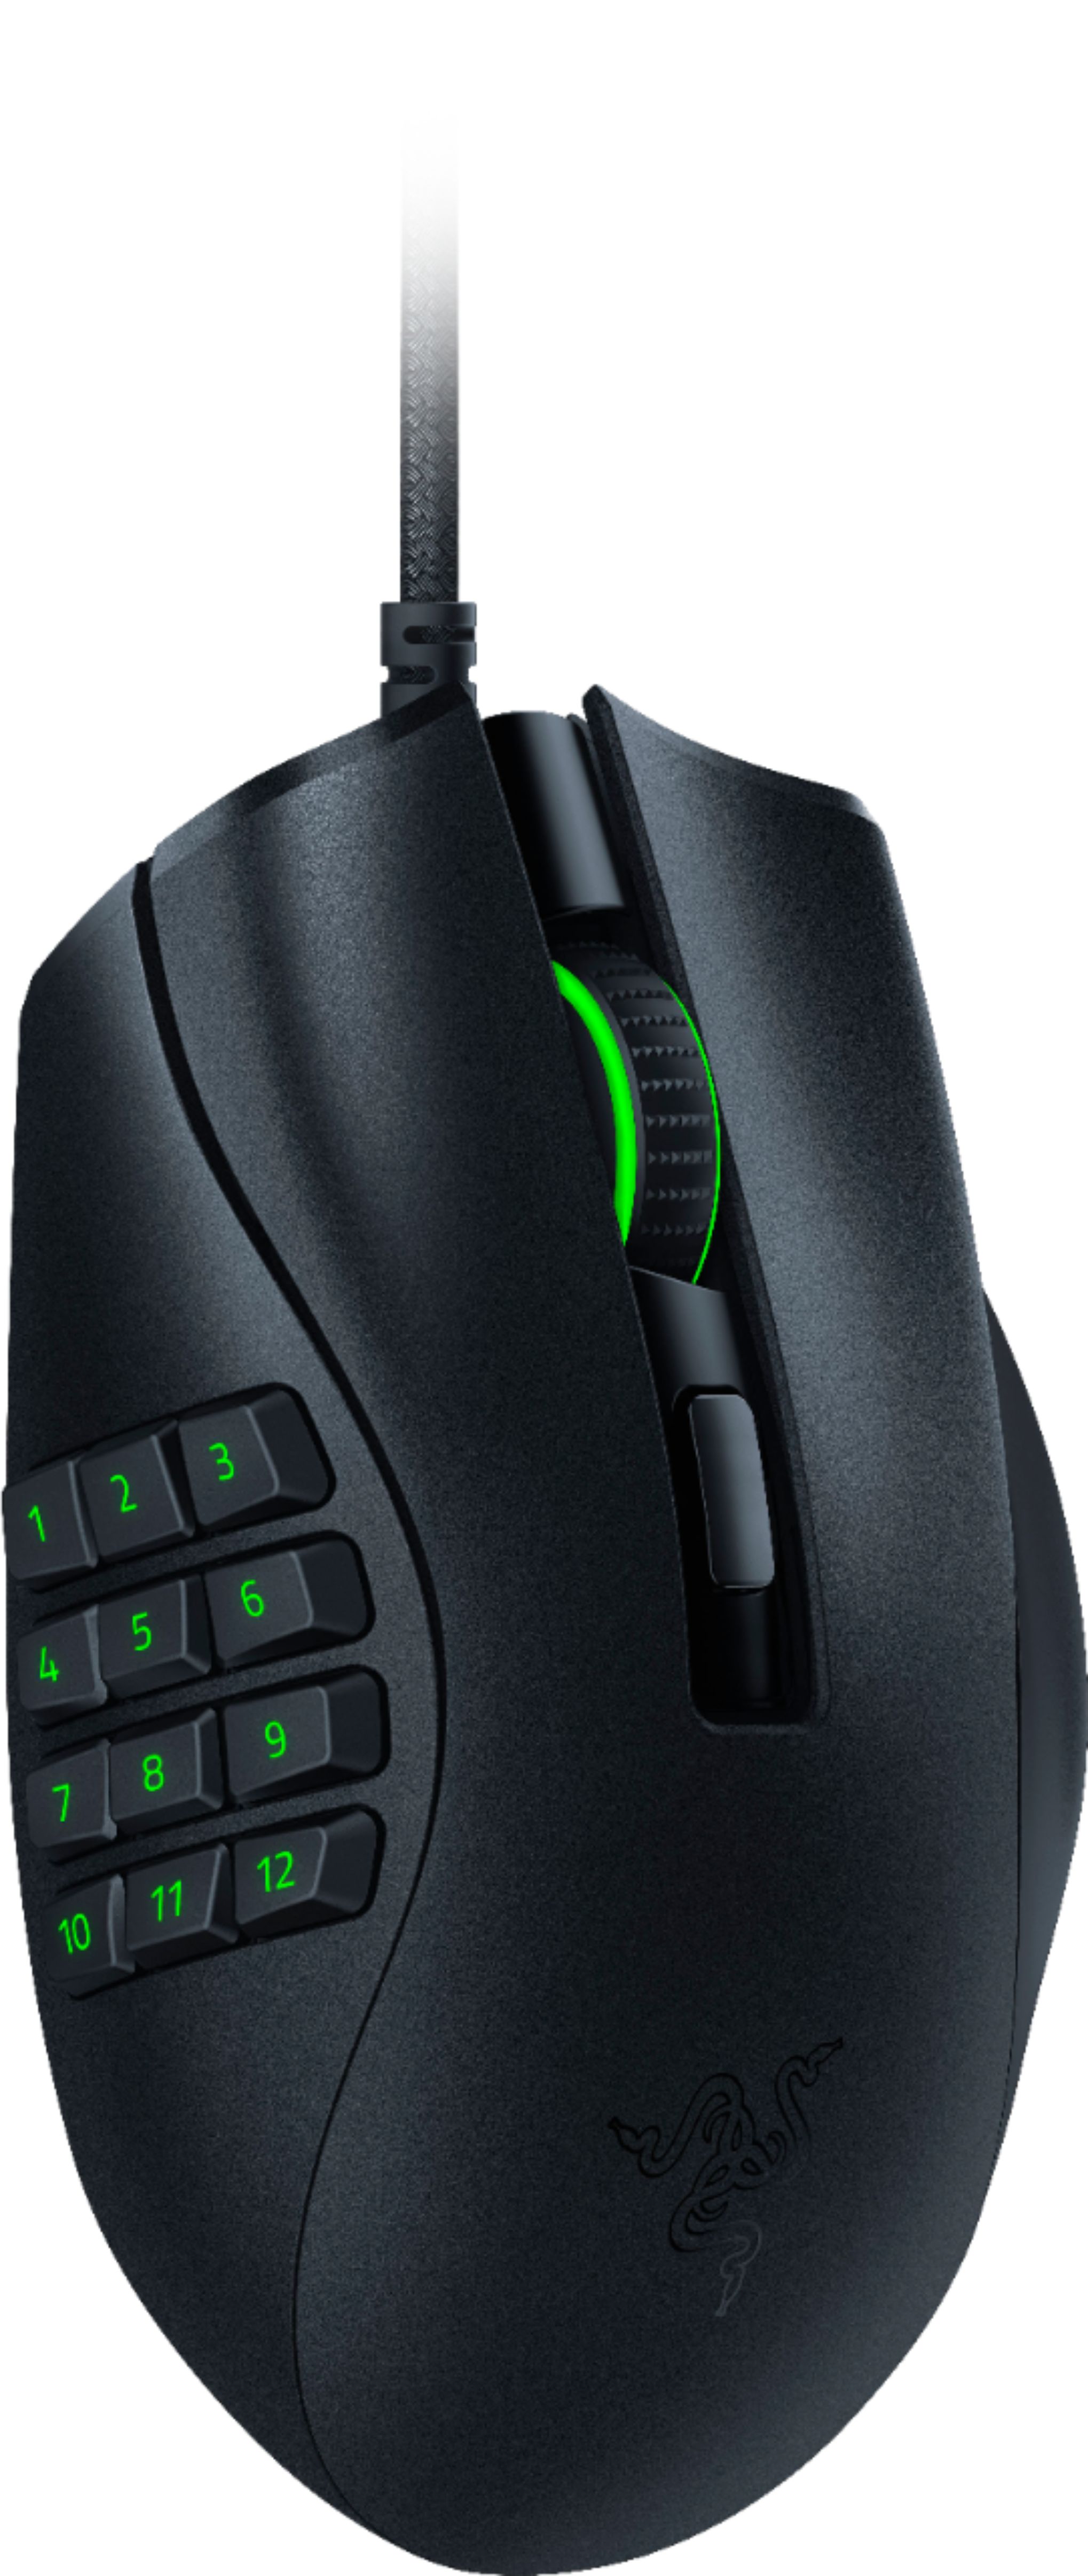 Best Naga X 16 Optical Razer Black Wired Gaming with Buttons Buy Programmable RZ01-03590100-R3U1 - Mouse